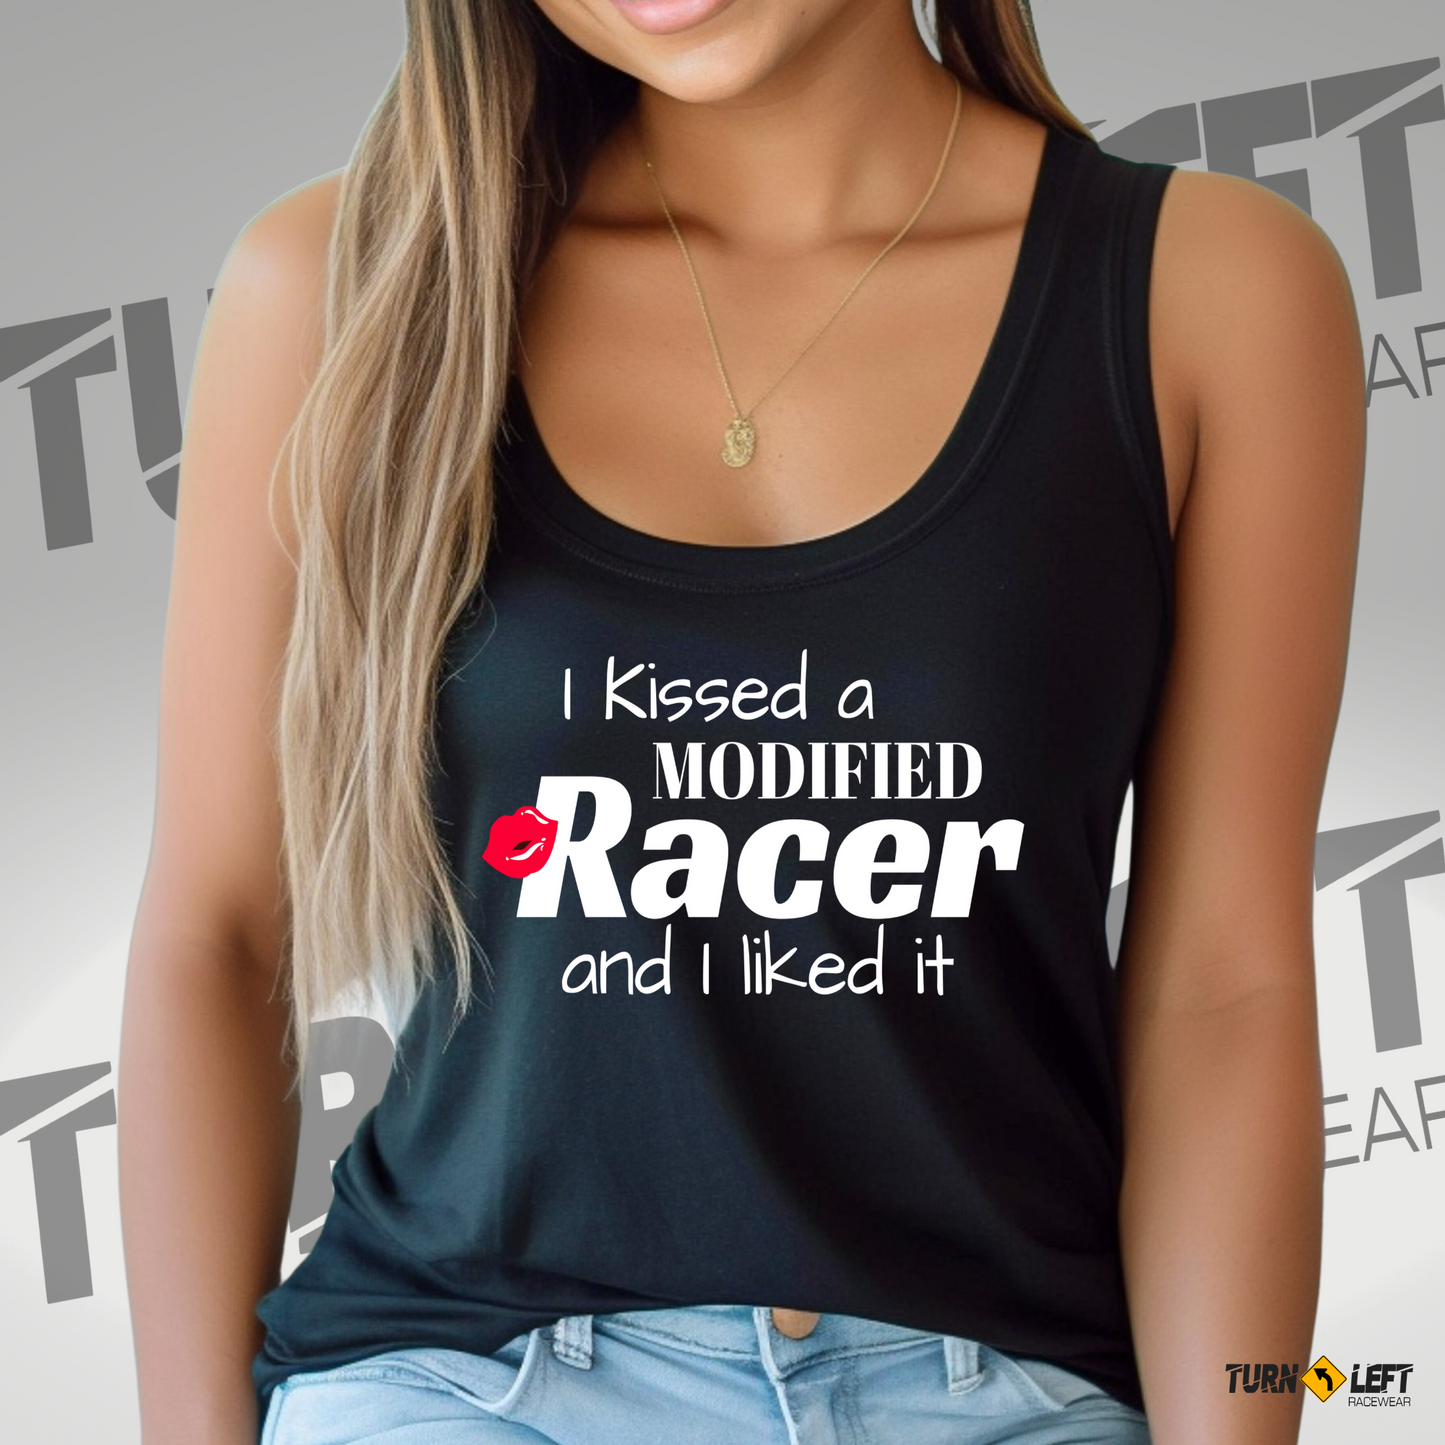 I Kissed A Modified Racer And I Liked It Tank Top. Women's dirt track racing shirts